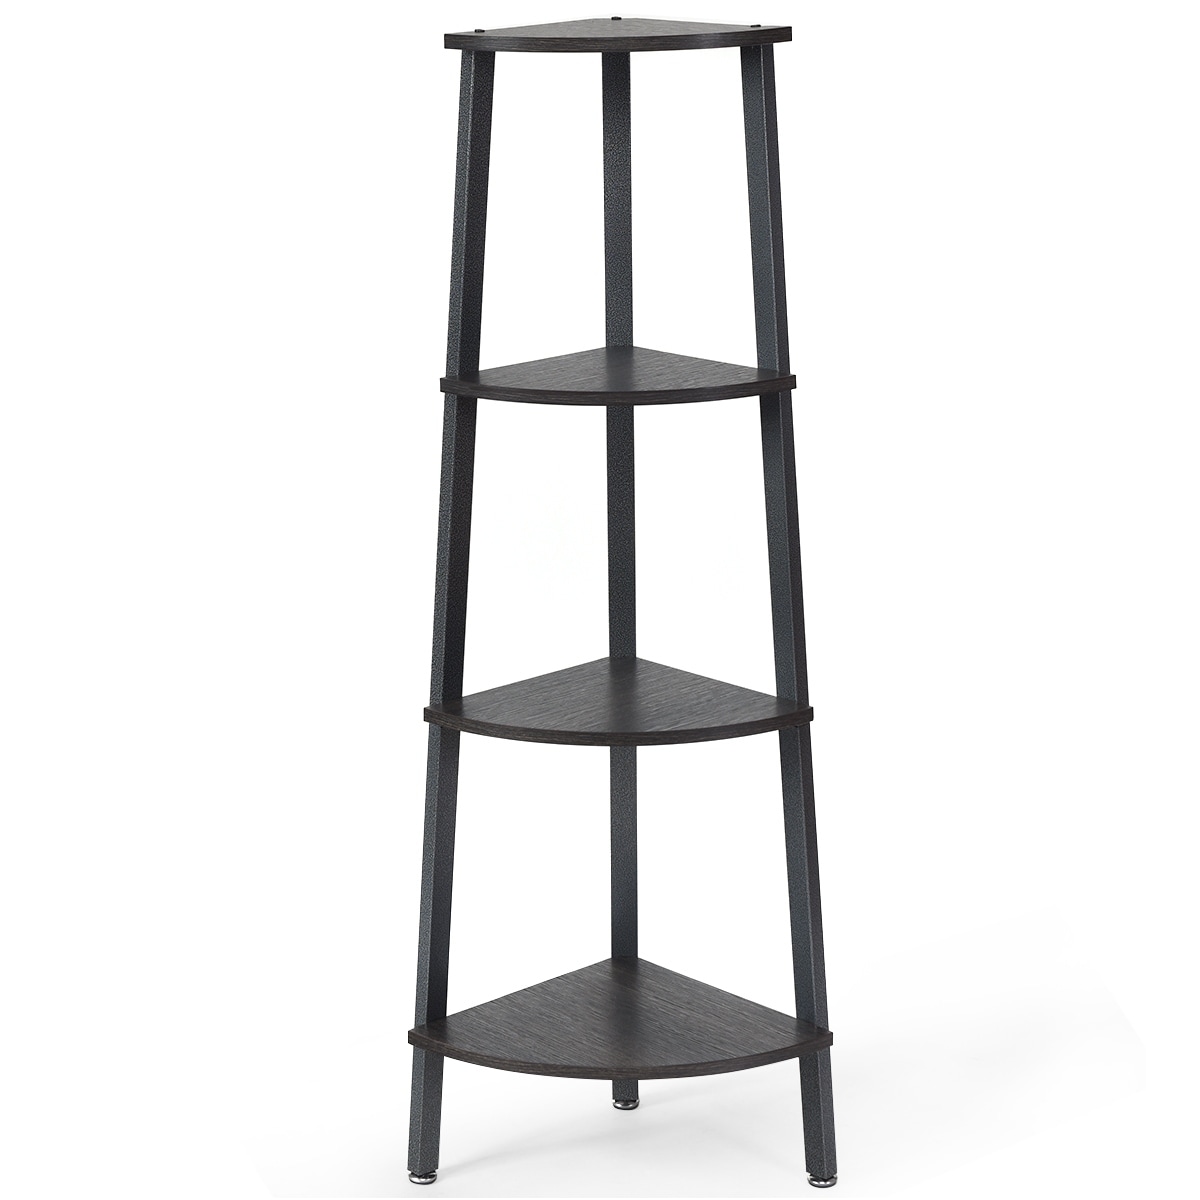 https://ak1.ostkcdn.com/images/products/is/images/direct/1b682dd9f98f5b1b8b50b5ef52984e010268c32e/Costway-4-Tier-Corner-Shelf-Metal-Storage-Rack-Domestic-Bookcase-Display-Stand-Wood-Grey.jpg